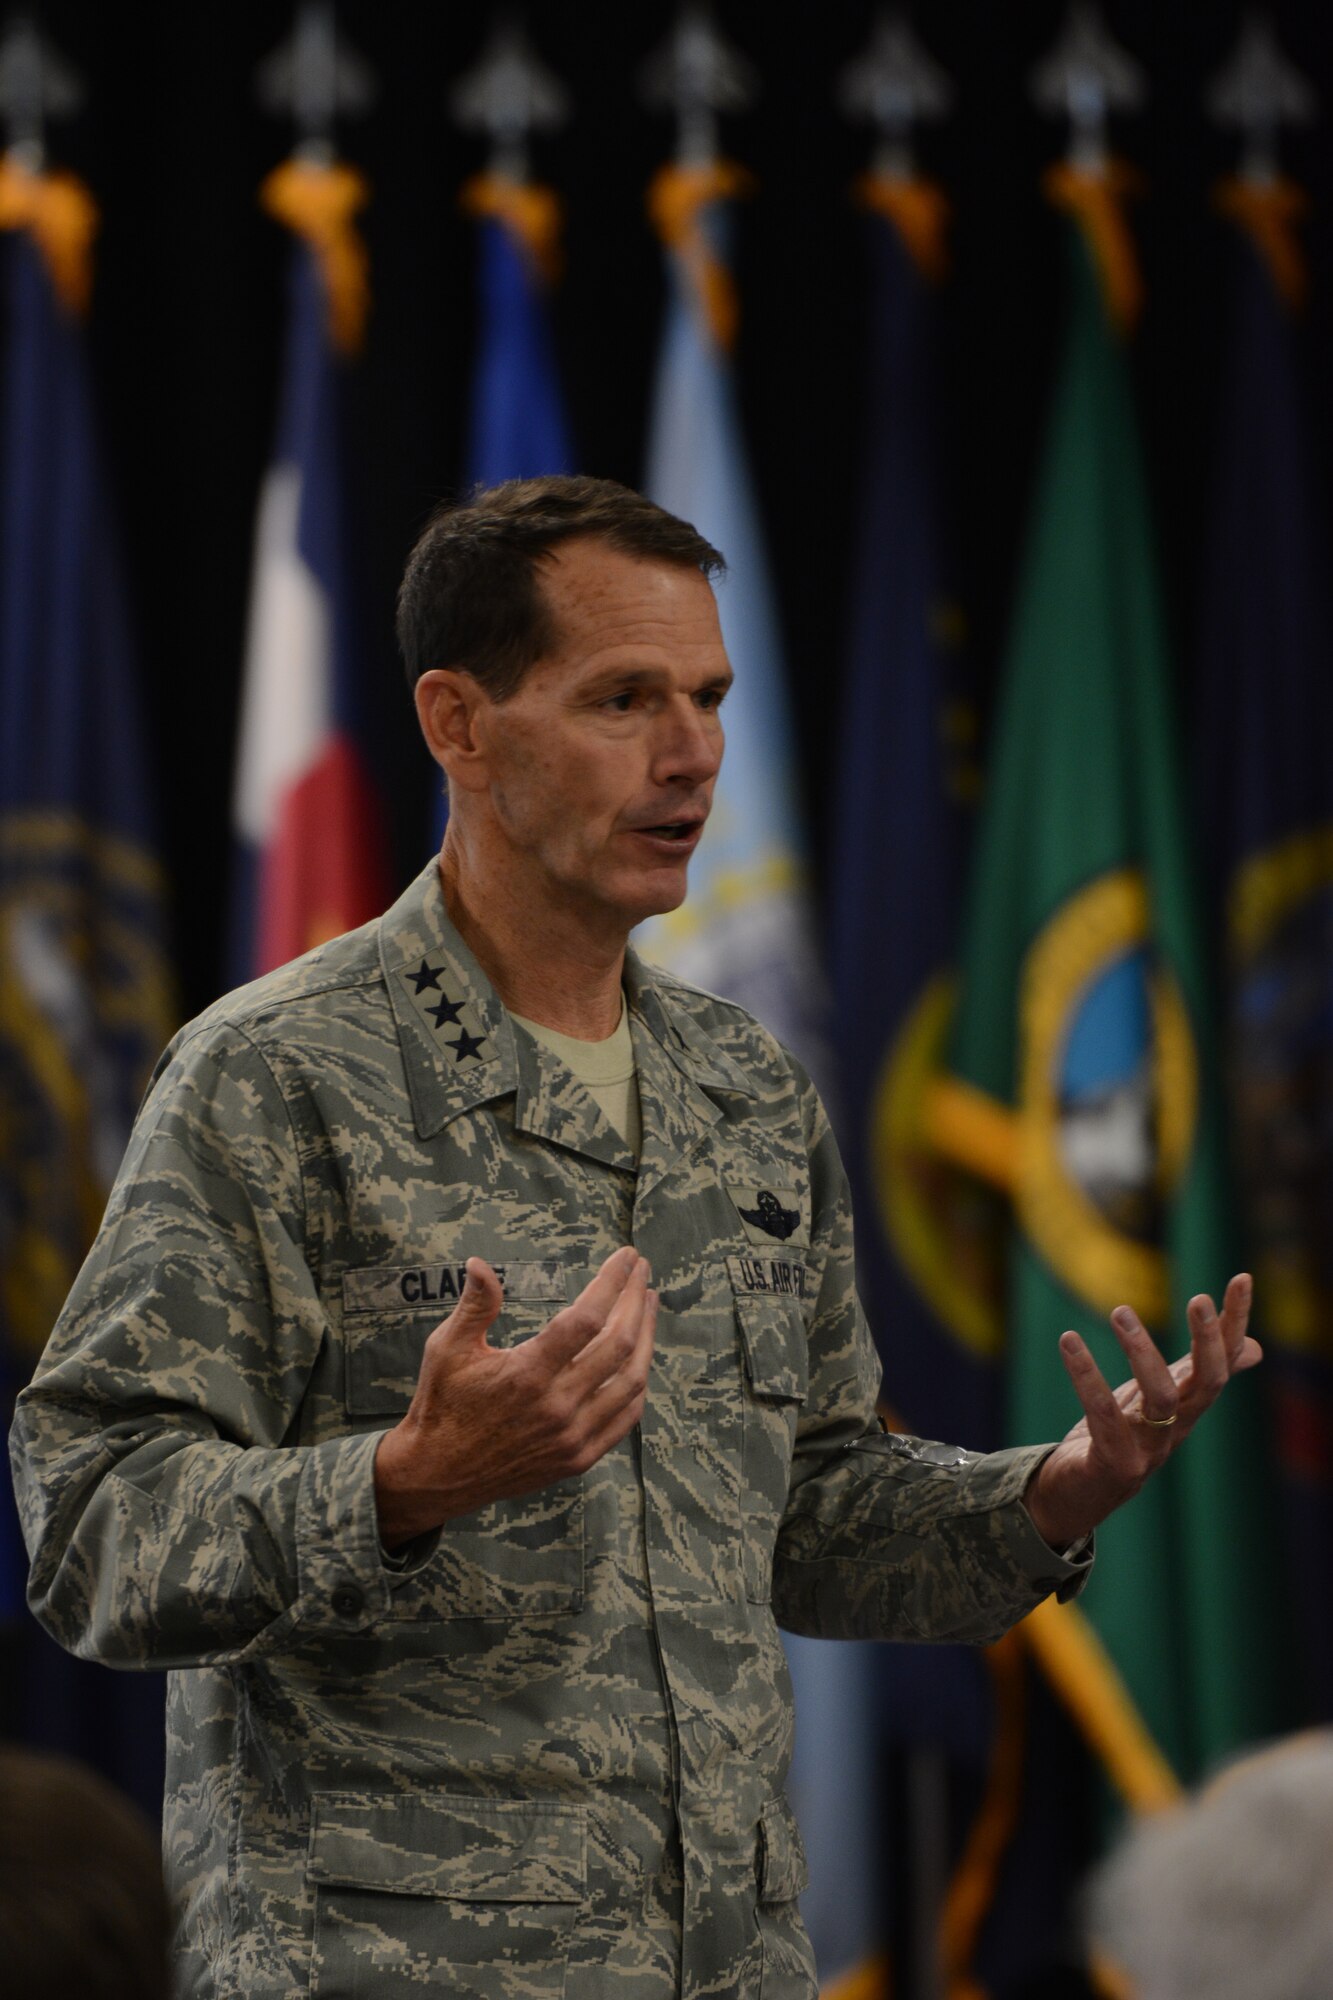 Lt. Gen. Stanley E. Clarke III, Air National Guard director, speaks to general officers from around the nation during the 2014 Air National Guard Executive Safety Summit at Volk Field Air National Guard Base, Wis., May 13, 2014. The summit taught leaders about a variety of topics including social media, budget, fitness and readiness. (Air National Guard photo by Senior Airman Andrea F. Liechti)